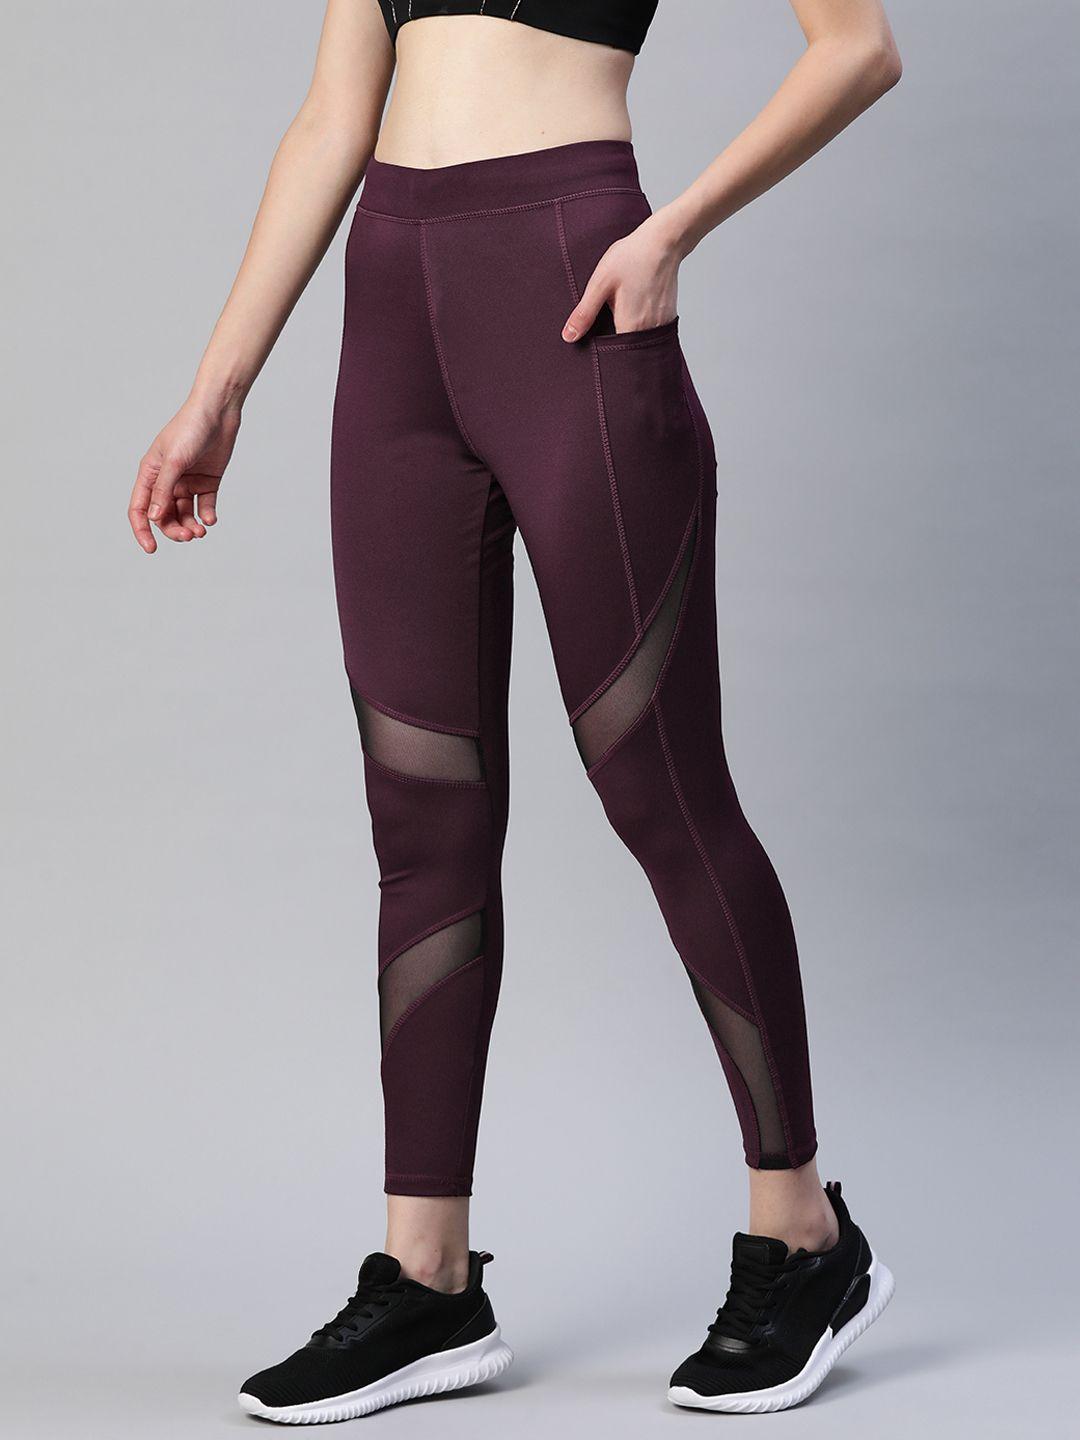 blinkin women maroon rapid dry tights with breathable mesh panels & side pockets